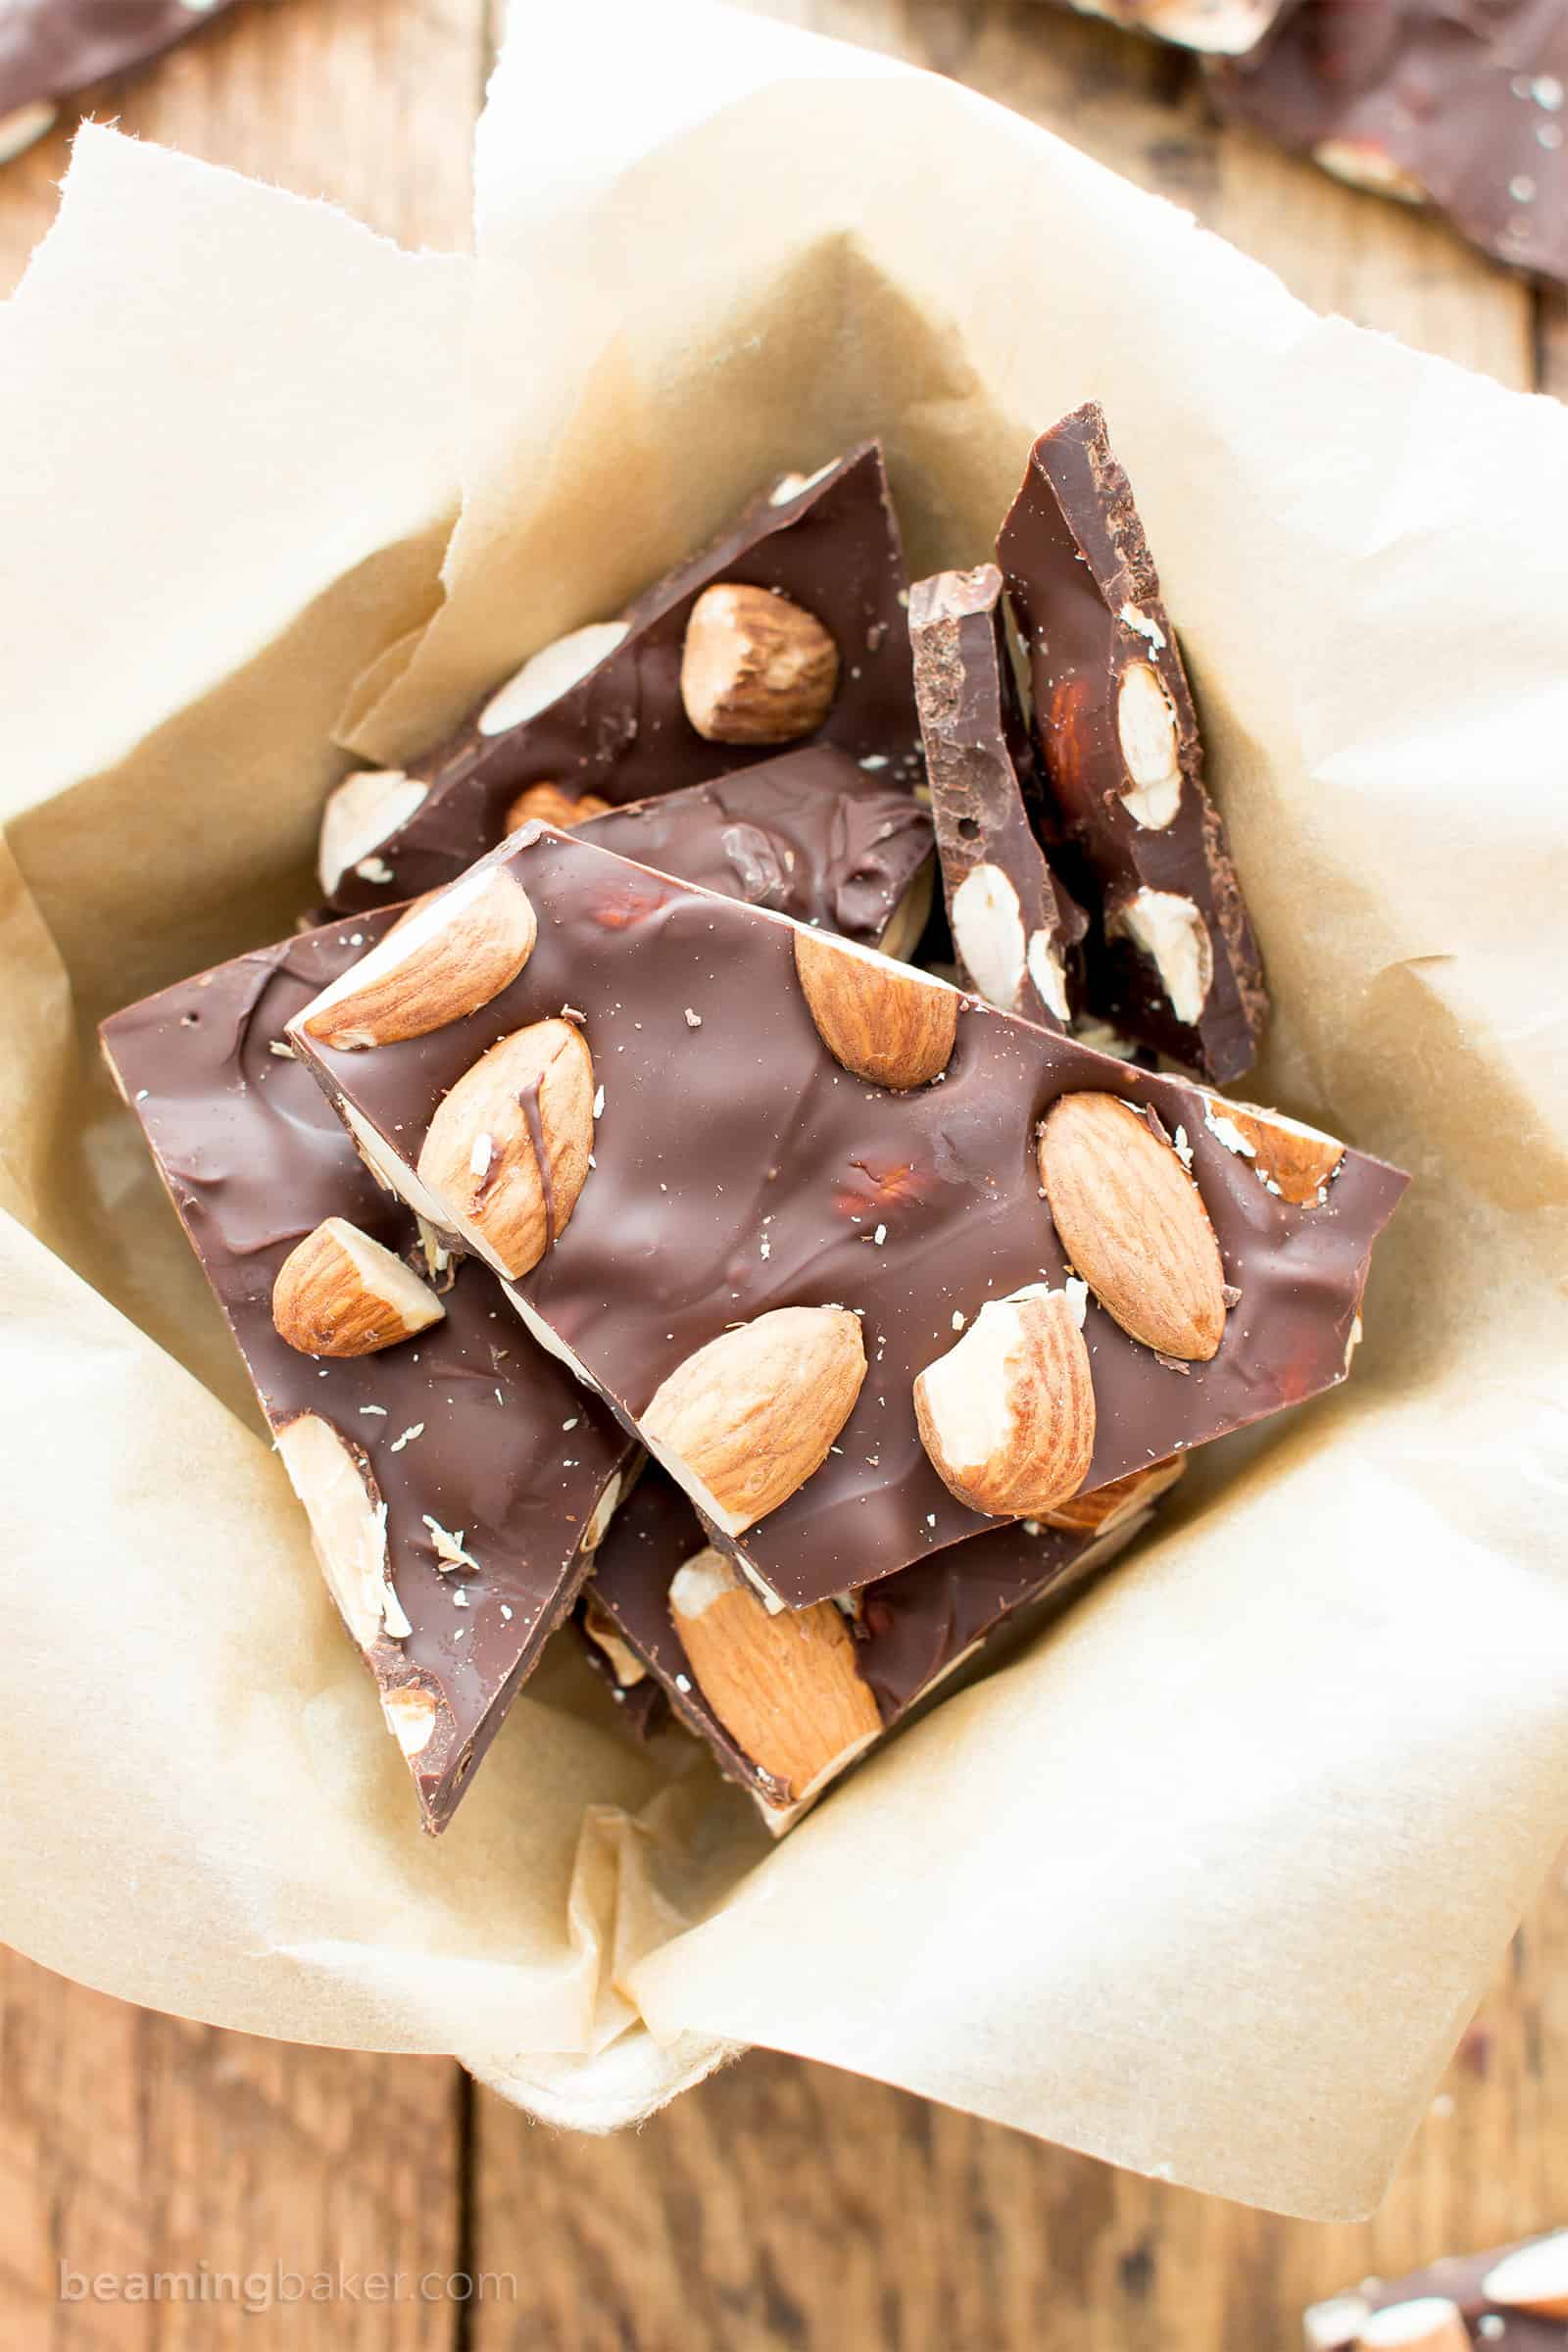 3 Ingredient Chocolate Almond Bark Recipe (V, GF): a fun recipe for thick pieces of indulgent chocolate bark perfectly packed with almonds. #Vegan #Paleo #GlutenFree #DairyFree #Dessert #Candy | Recipe on BeamingBaker.com